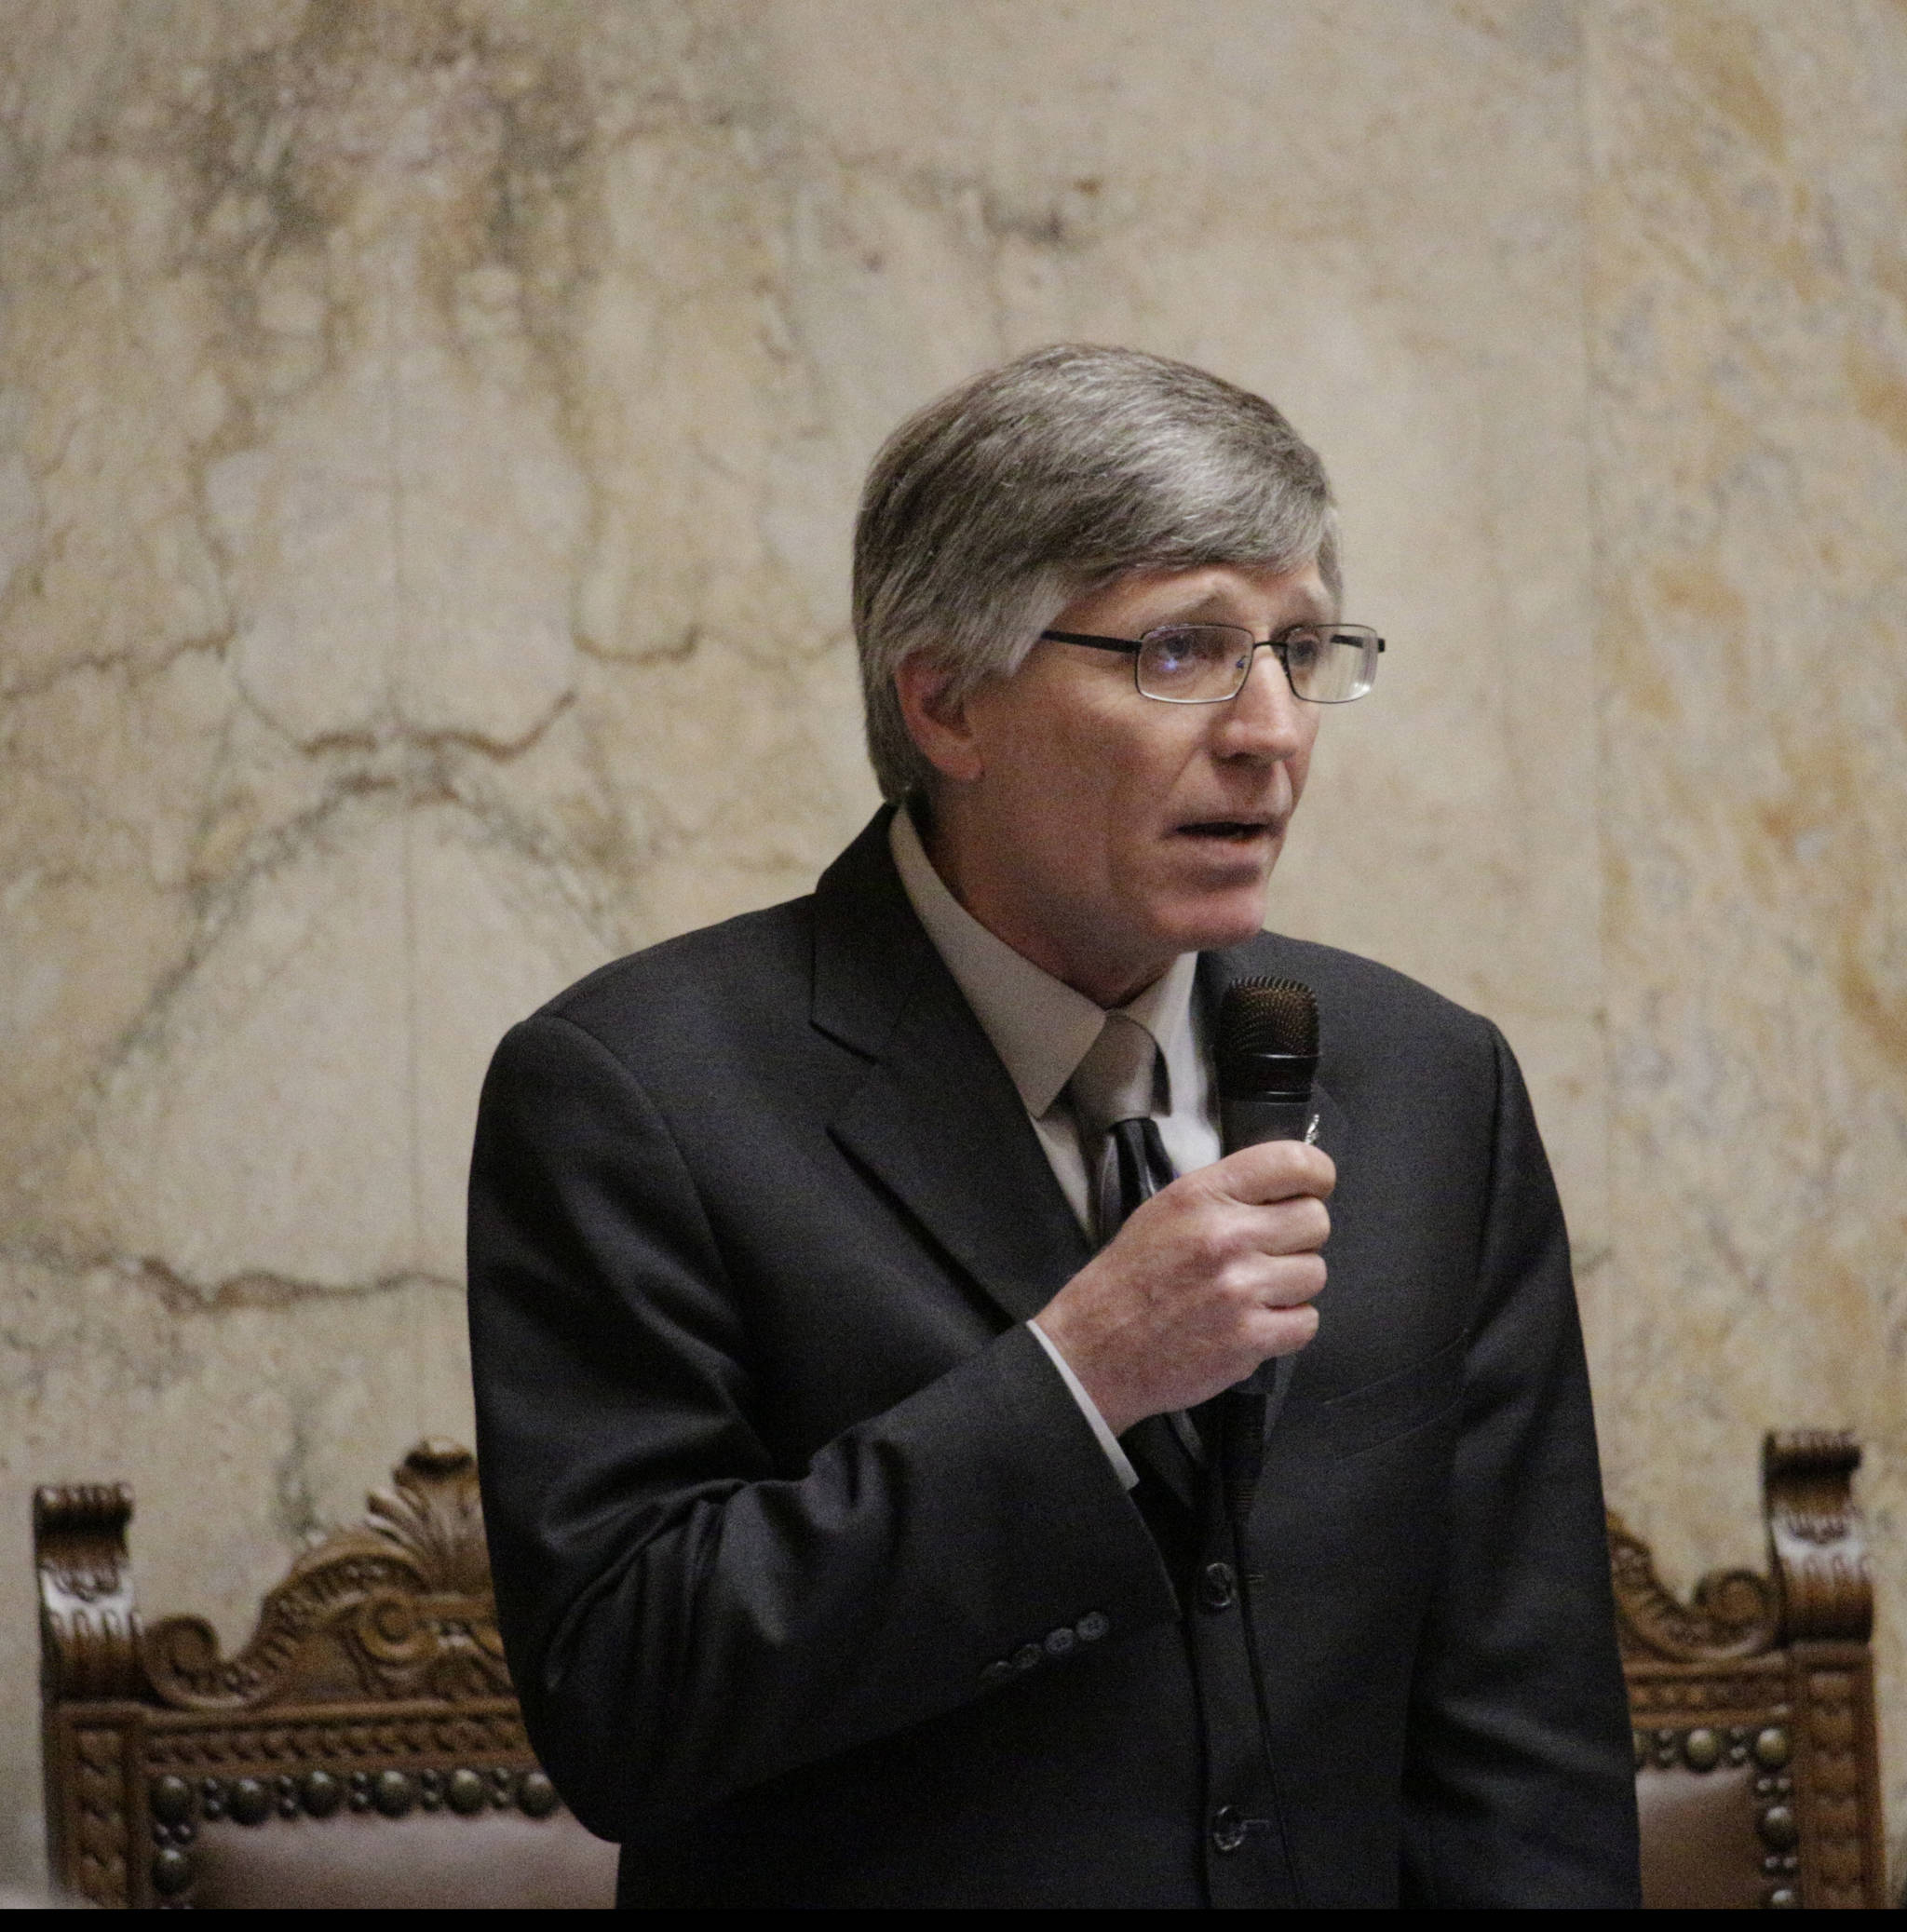 Democratic Rep. Timm Ormsby speaks on the House floor in support of a $44.9 billion two-year state budget proposal Friday in Olympia. (Rachel La Corte/The Associated Press)